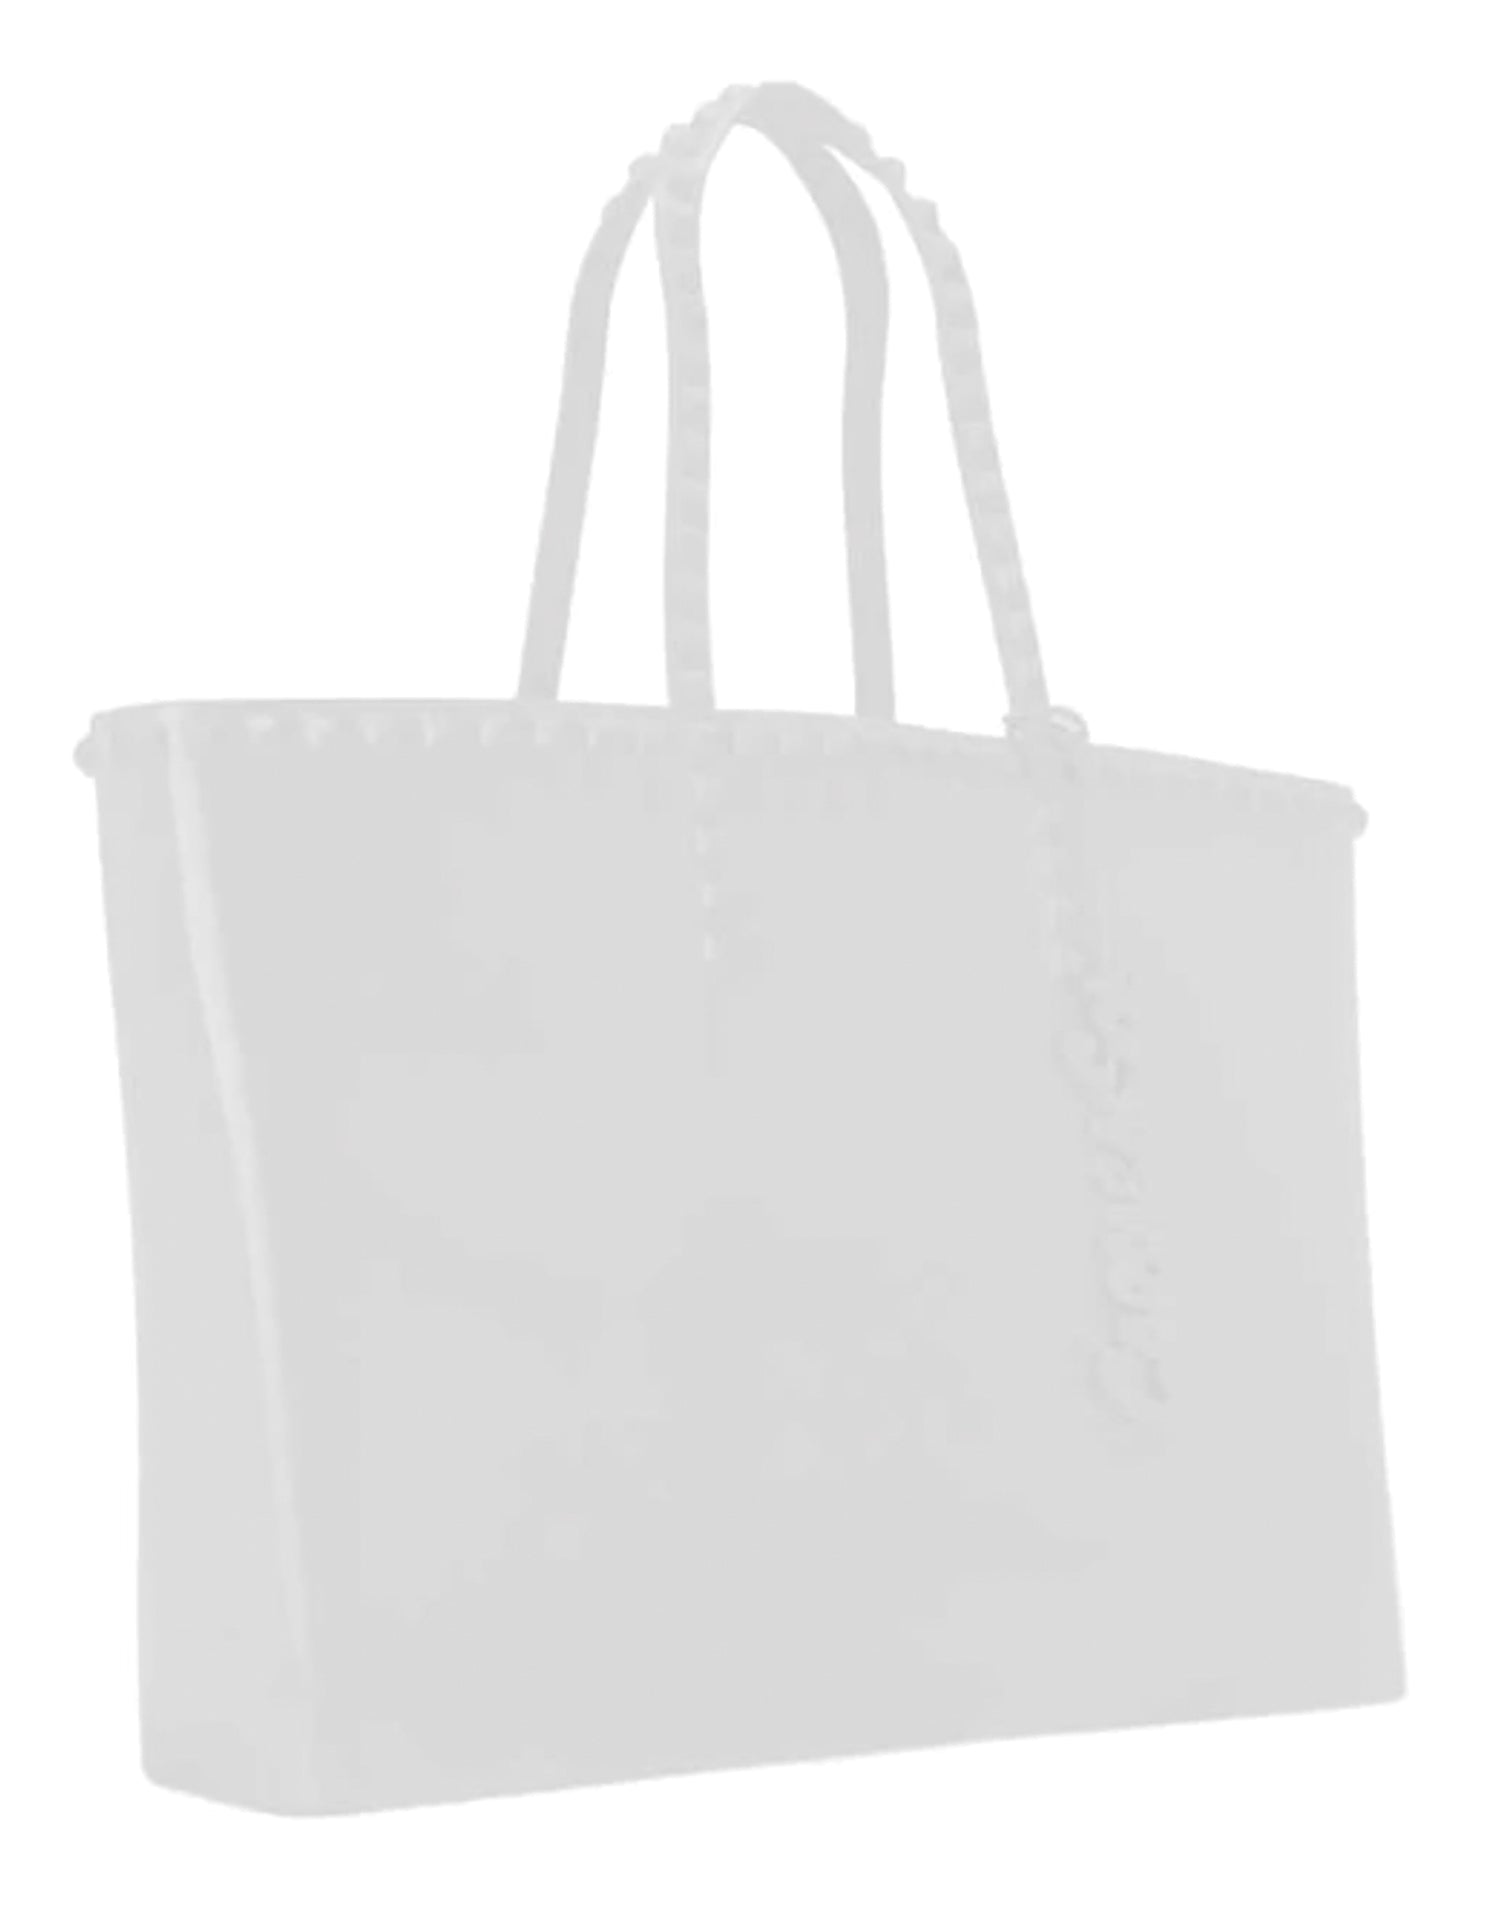 Carmen Sol's Angelica Large Tote in White - product view 